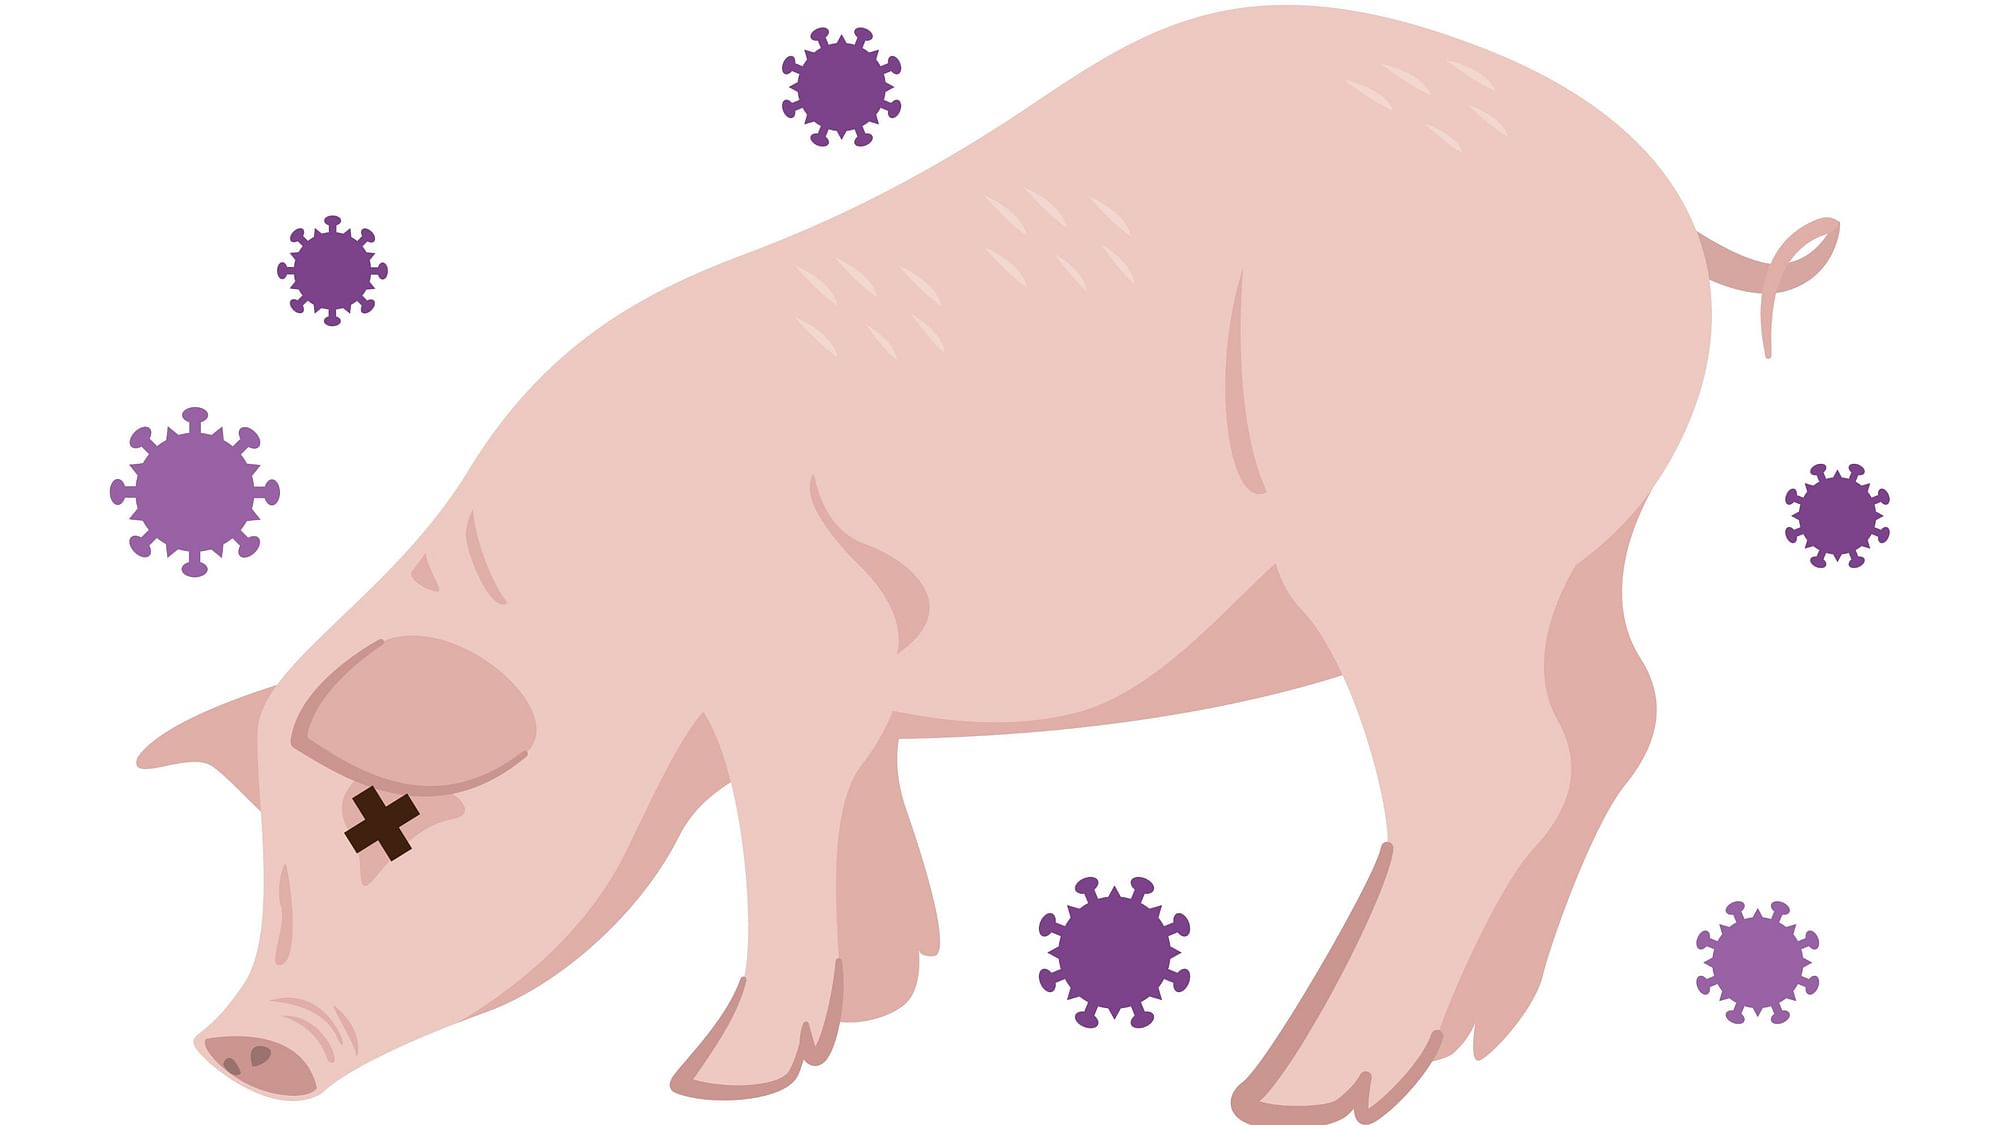 Scientists are working to develop a vaccine to help guard the world’s pork supply as a deadly virus ravages Asia’s pig herds